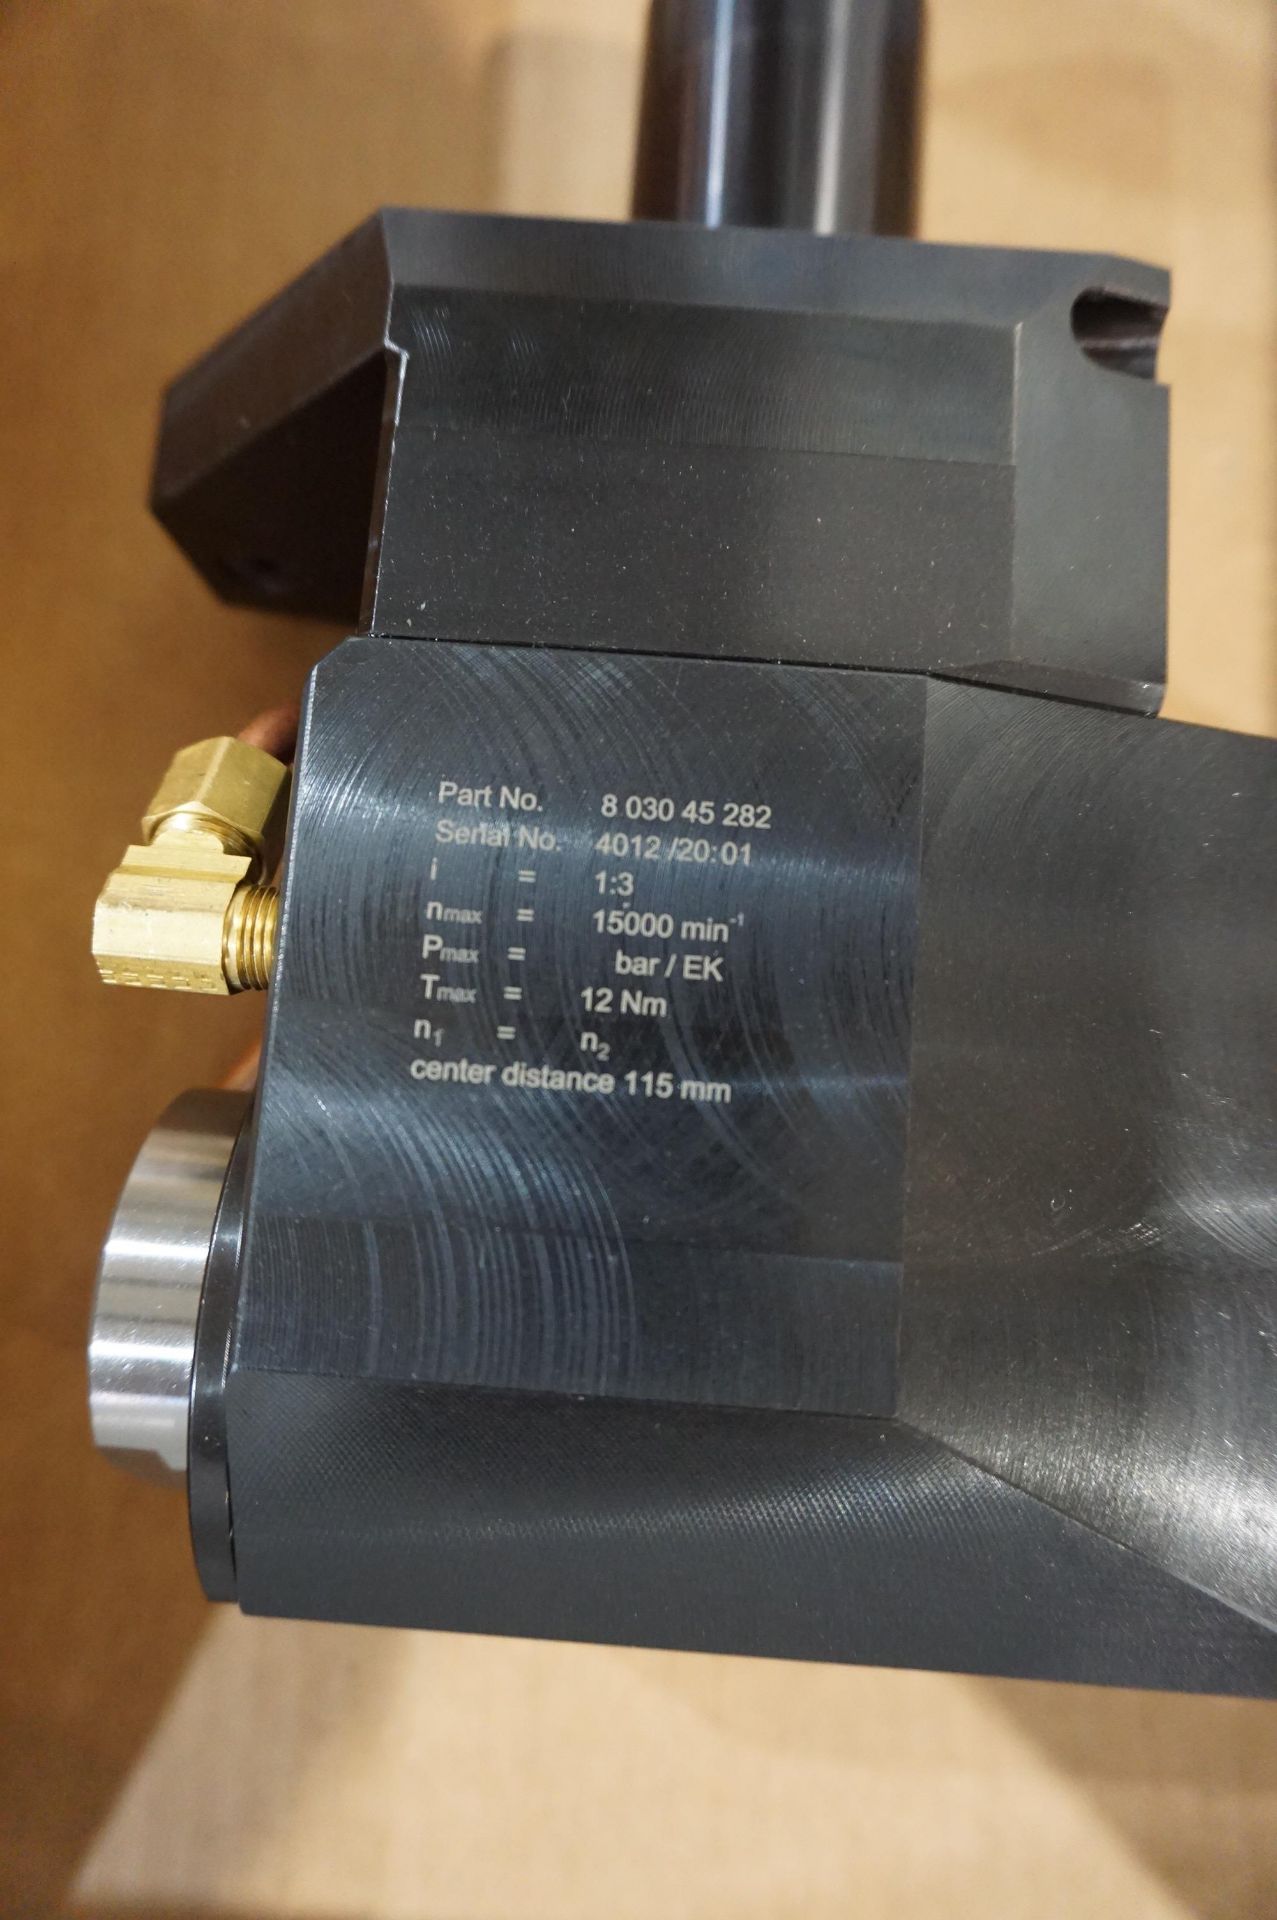 HEIMATEC HIGH SPEED DRIVEN TOOL HOLDER FOR MAZAK HQR, 15,000 RPM, PART NO 803045282, S/N 4012 / 20: - Image 3 of 3